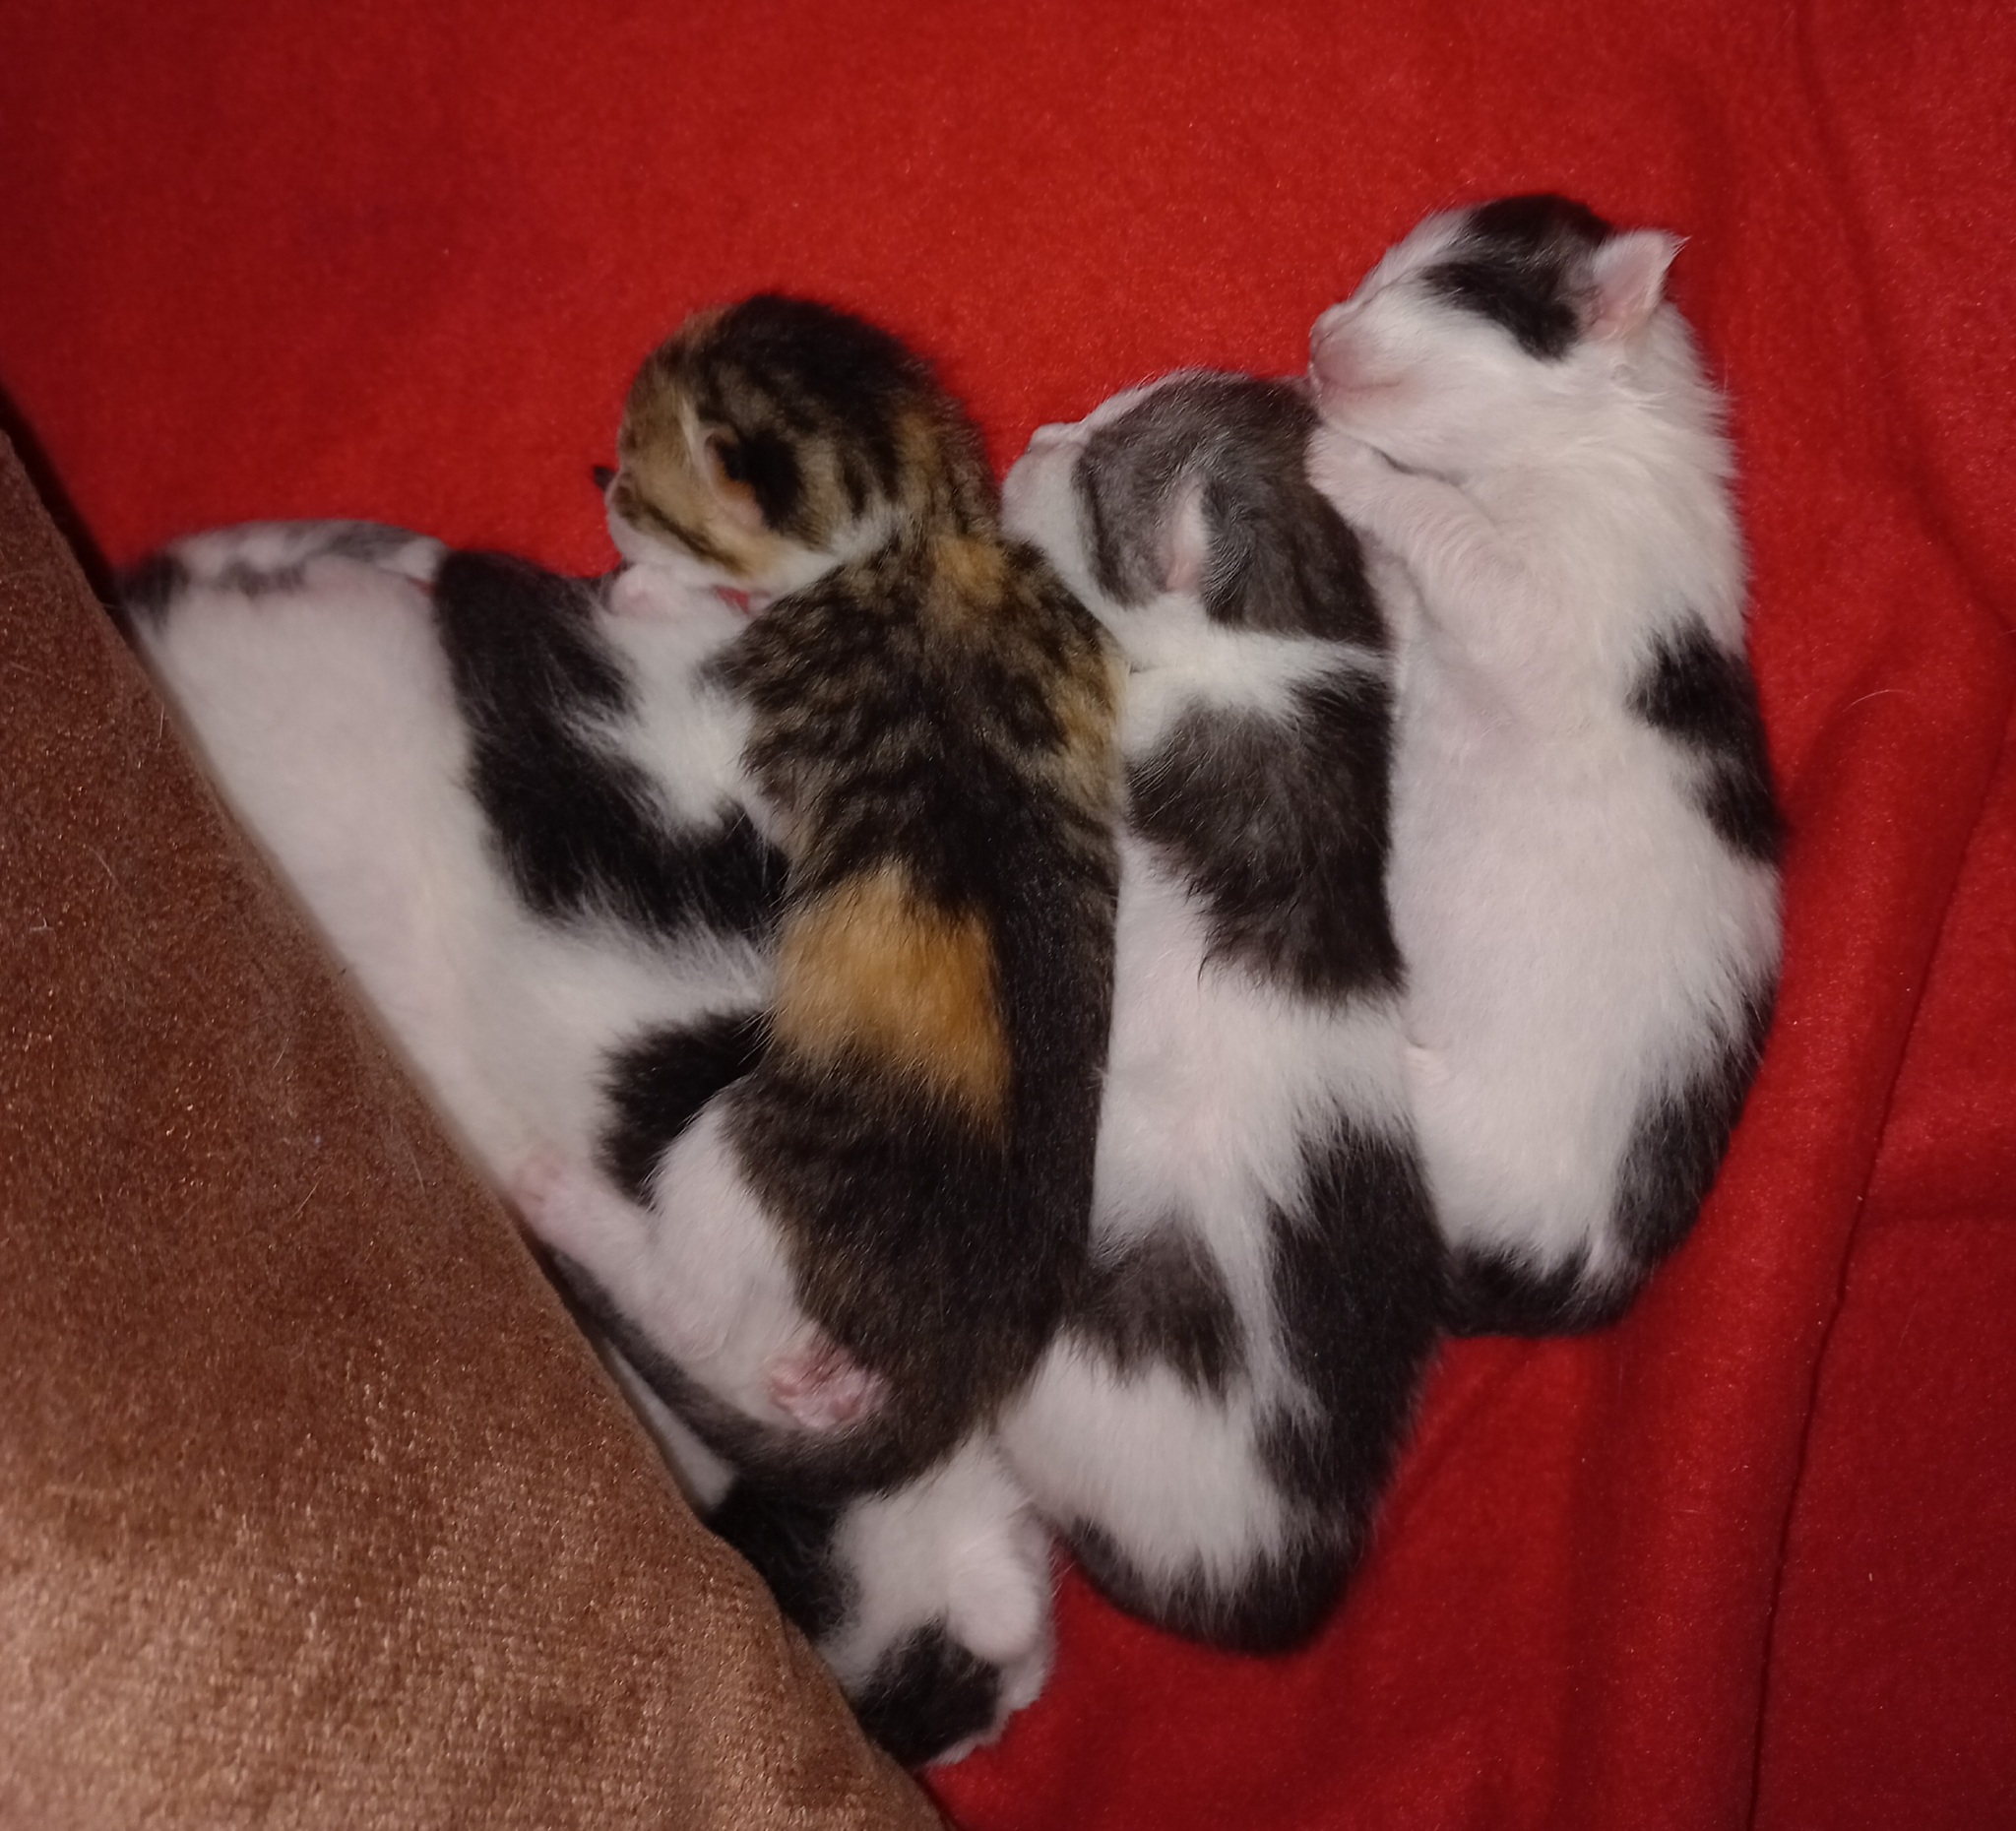 Sweet mini buns - My, cat, Kittens, Pet the cat, Cat family, Tricolor cat, Pink, Black and white, Pets, Animals, Feeding, Fluffy, Longpost